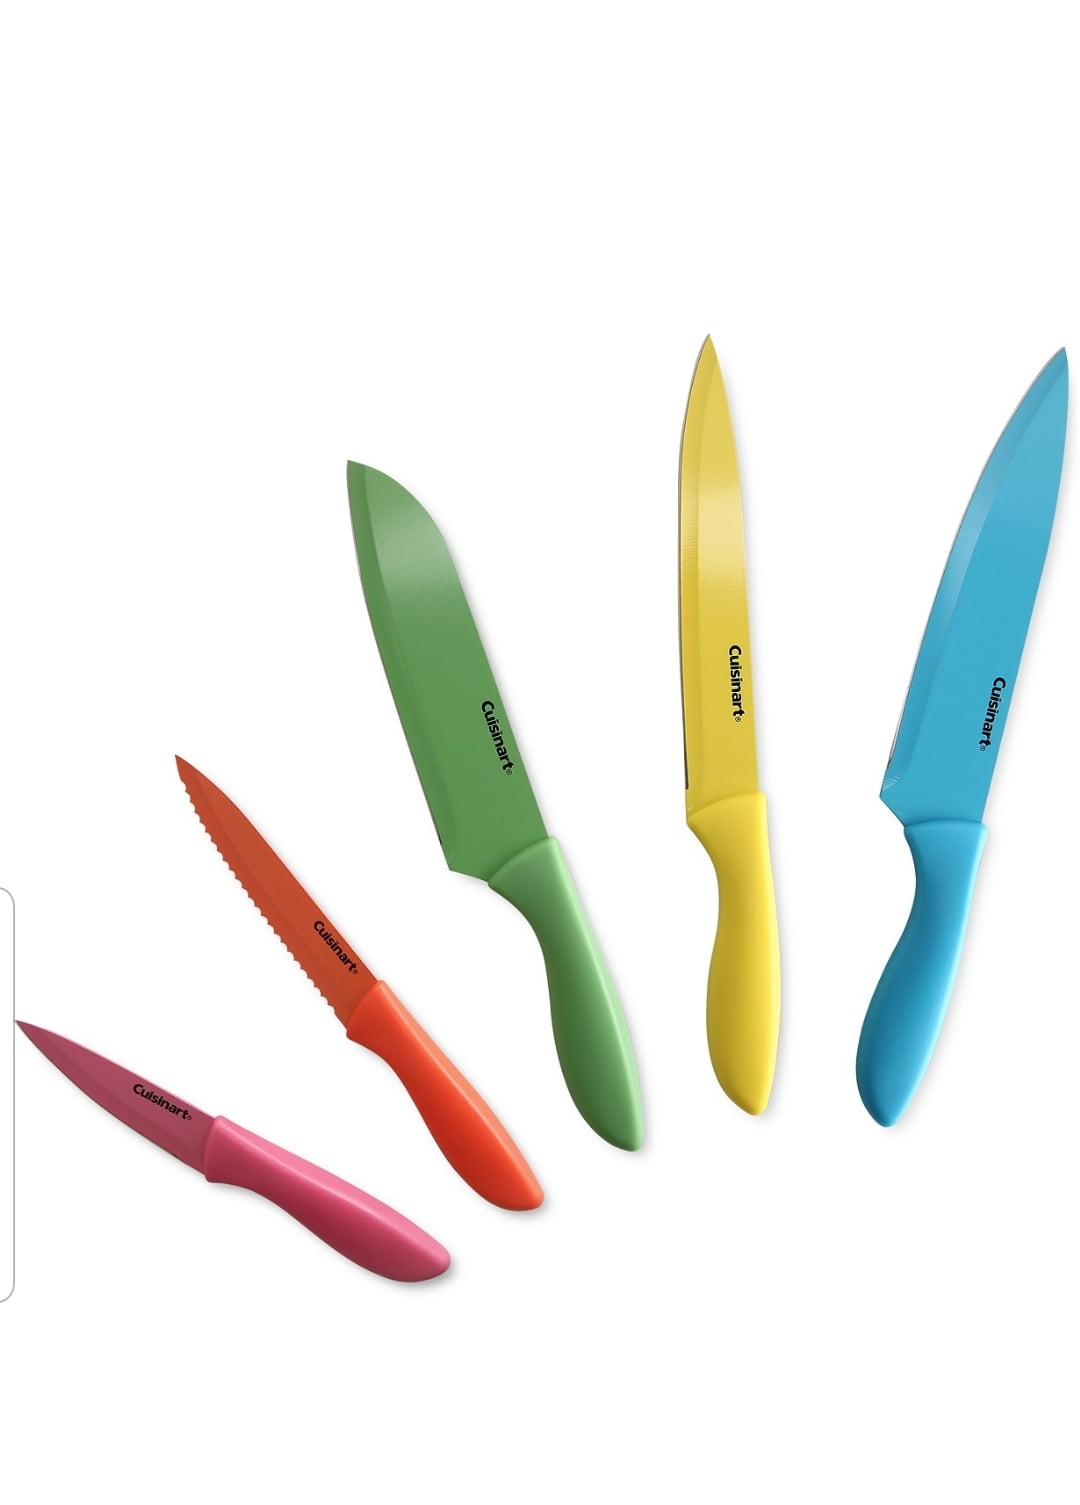 Cuisinart 10-Pc. Ceramic-Coated Printed Knife Set w/Blade Guards